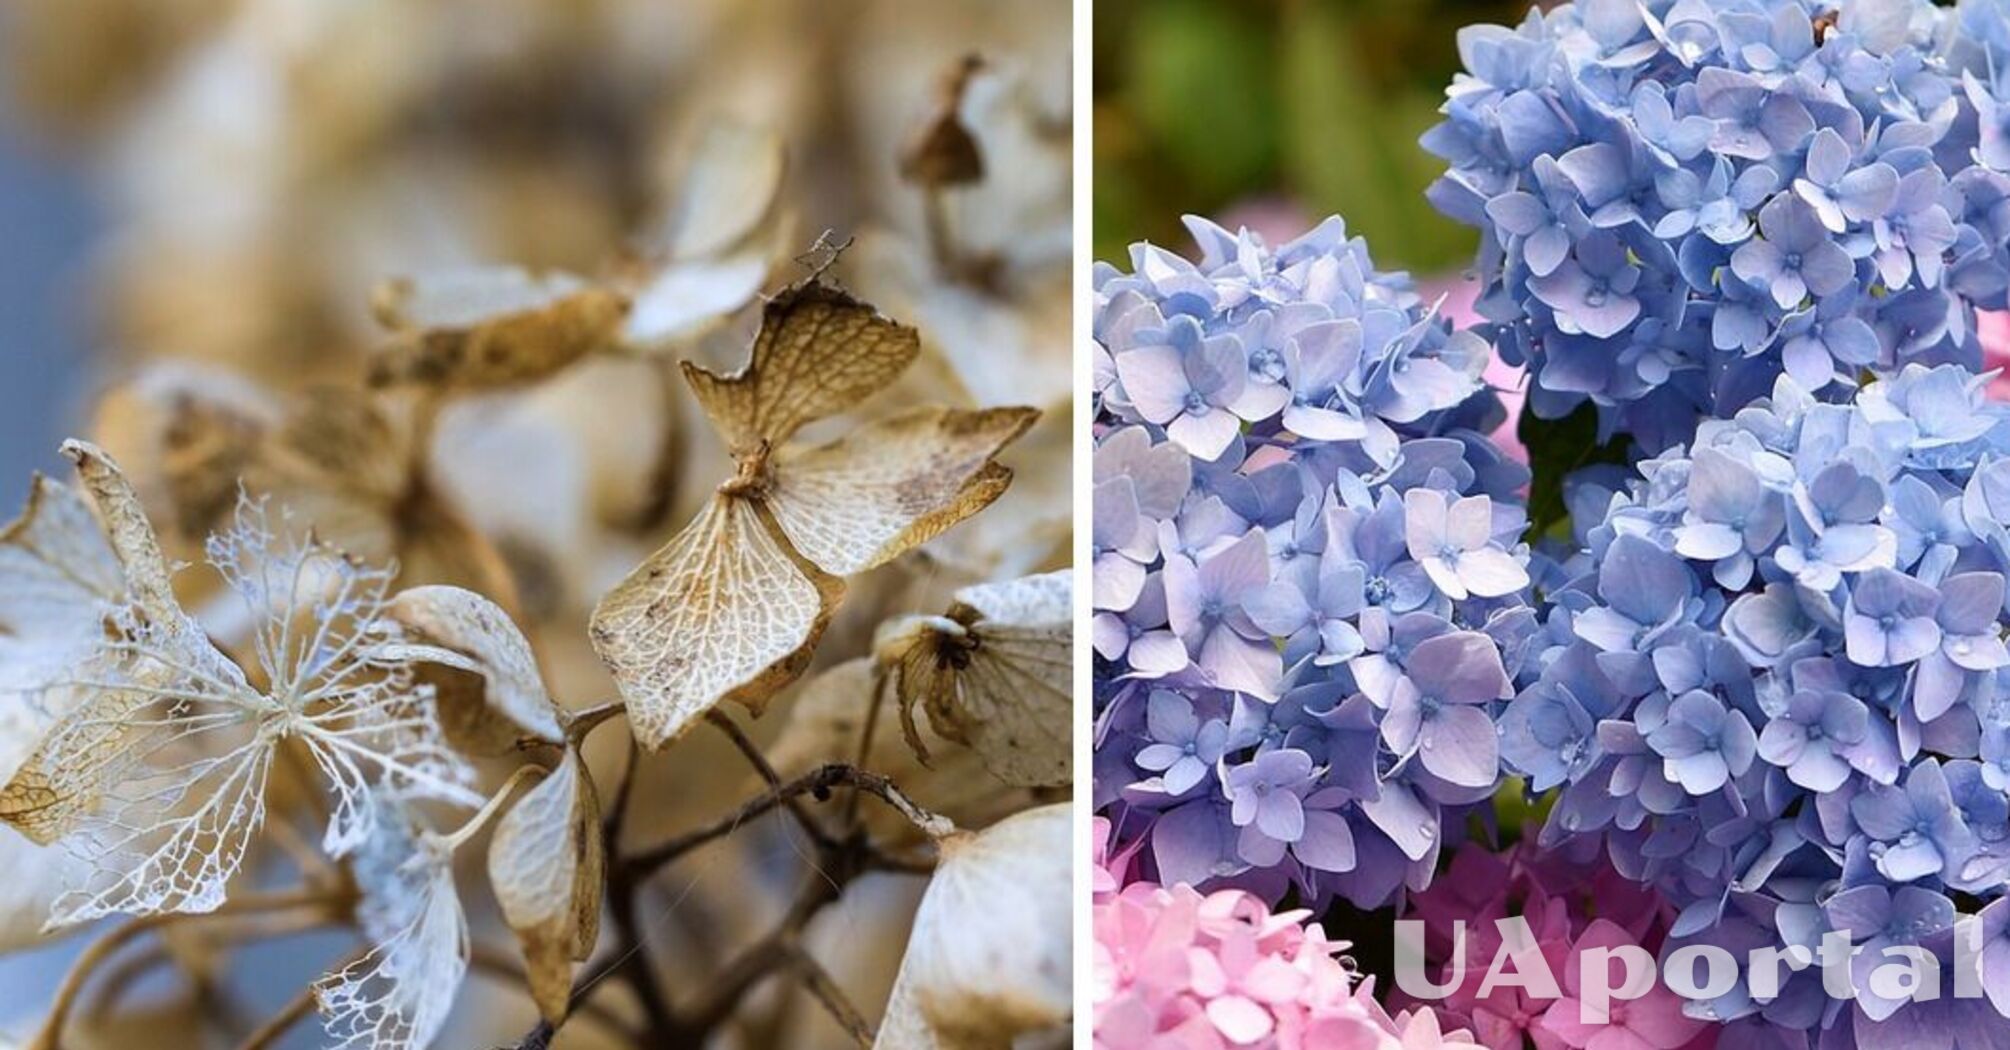 Simple tips for caring for the hydrangea in winter will ensure beautiful flowering